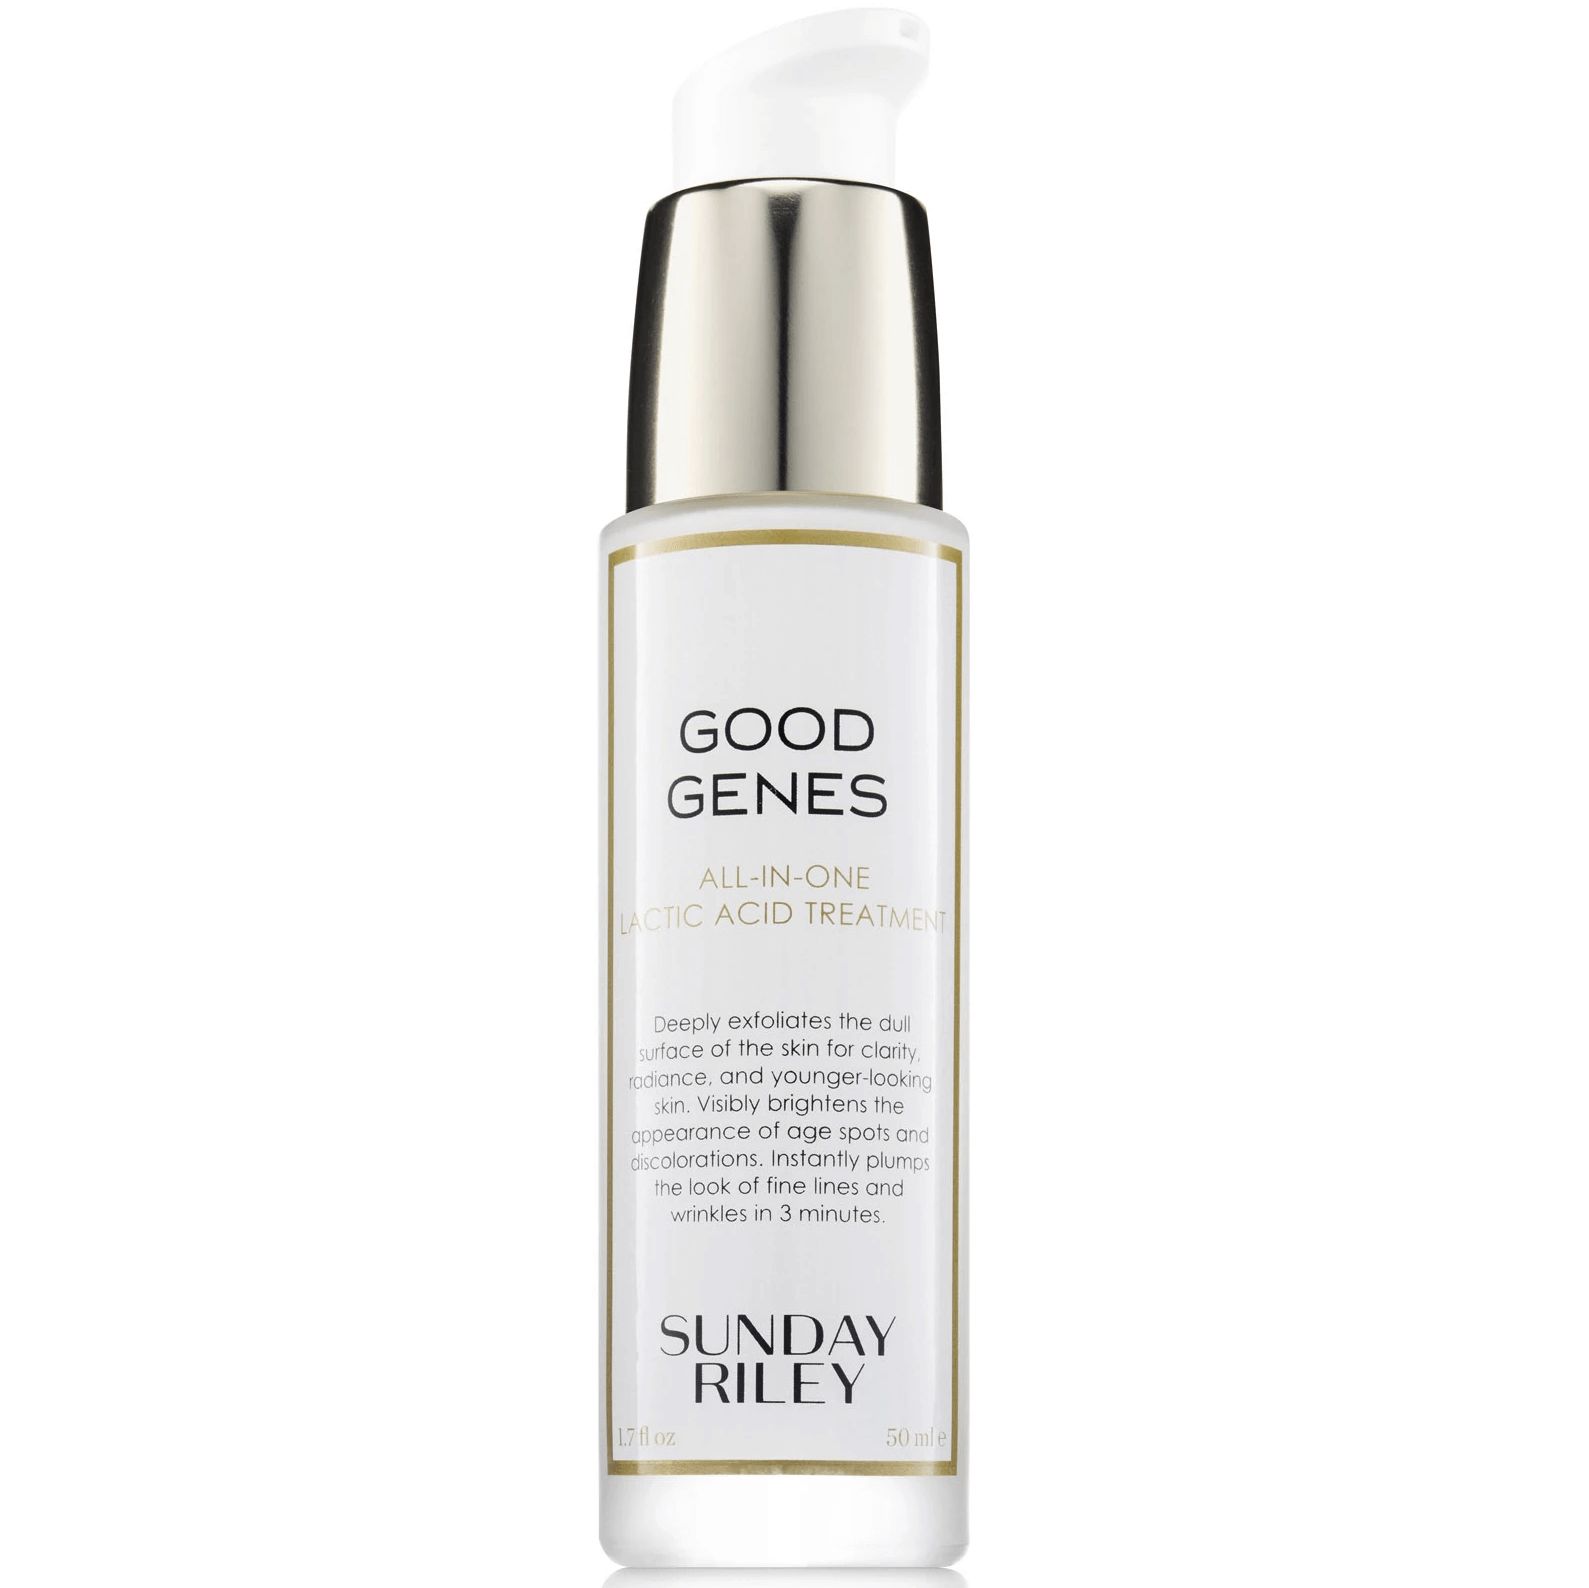 Sunday Riley Good Genes All-In-One Lactic Acid Treatment 1.7oz | Skinstore